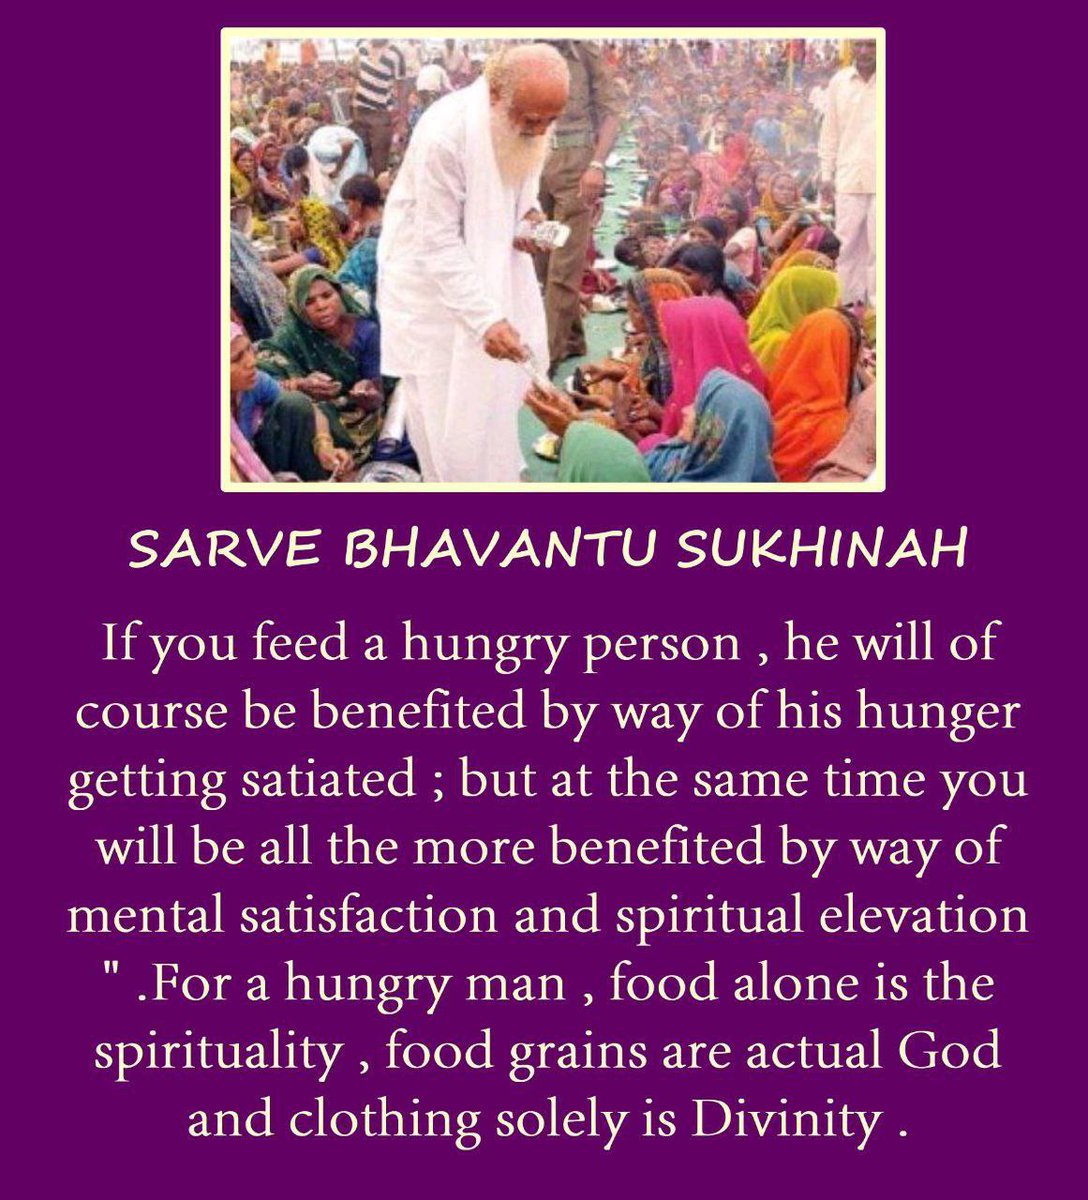 Sanatan Sanskriti is the only Sanskriti which has the power to uplift the entire humanity with inclusiveness.

Benevolent Saint Sant Shri Asharamji Bapu has #DedicatedEntireLife to spread the Moral Values of this culture, Hinduism for life is the way of life in future.